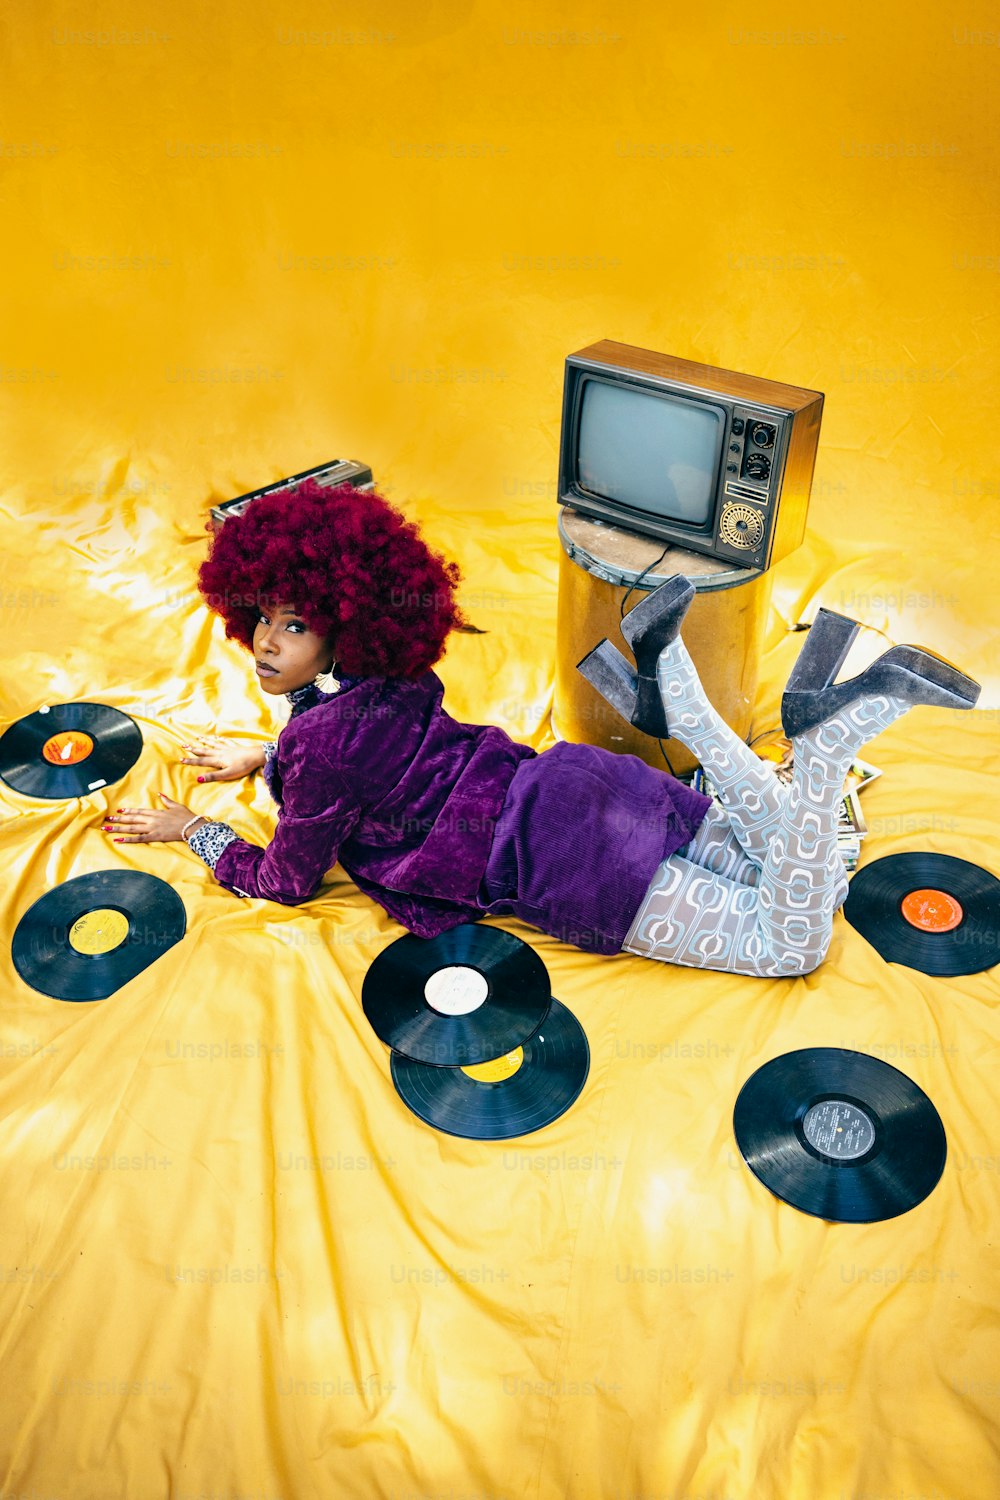 a woman laying on top of a bed covered in records